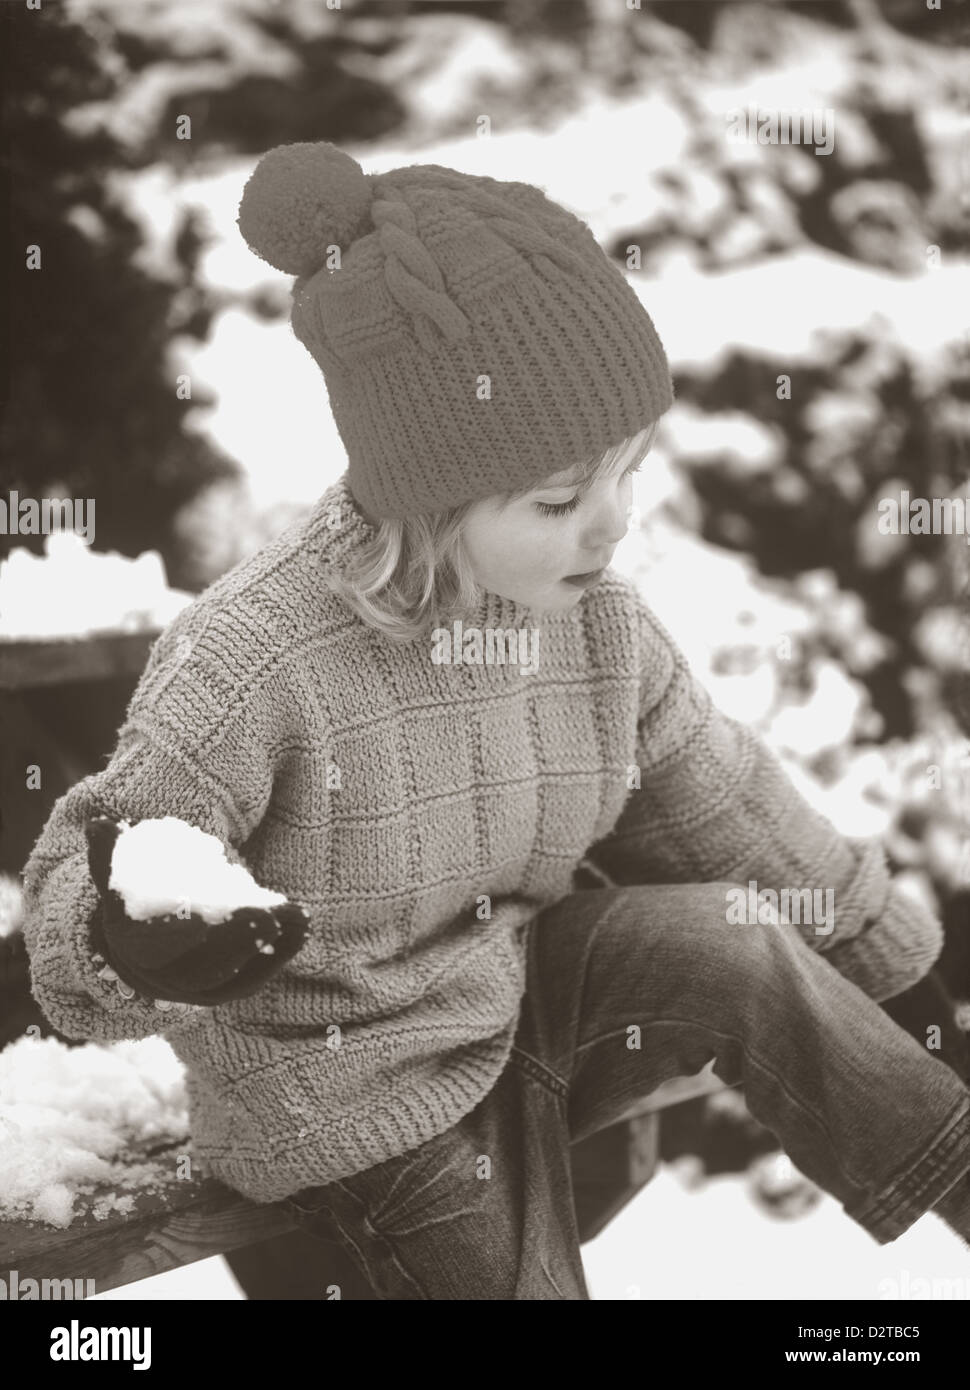 Vintage style photo of Young girl wearing vintage-style jumper and hat, holding a snowball in wintertime in Cornwall, England, U.K. Stock Photo